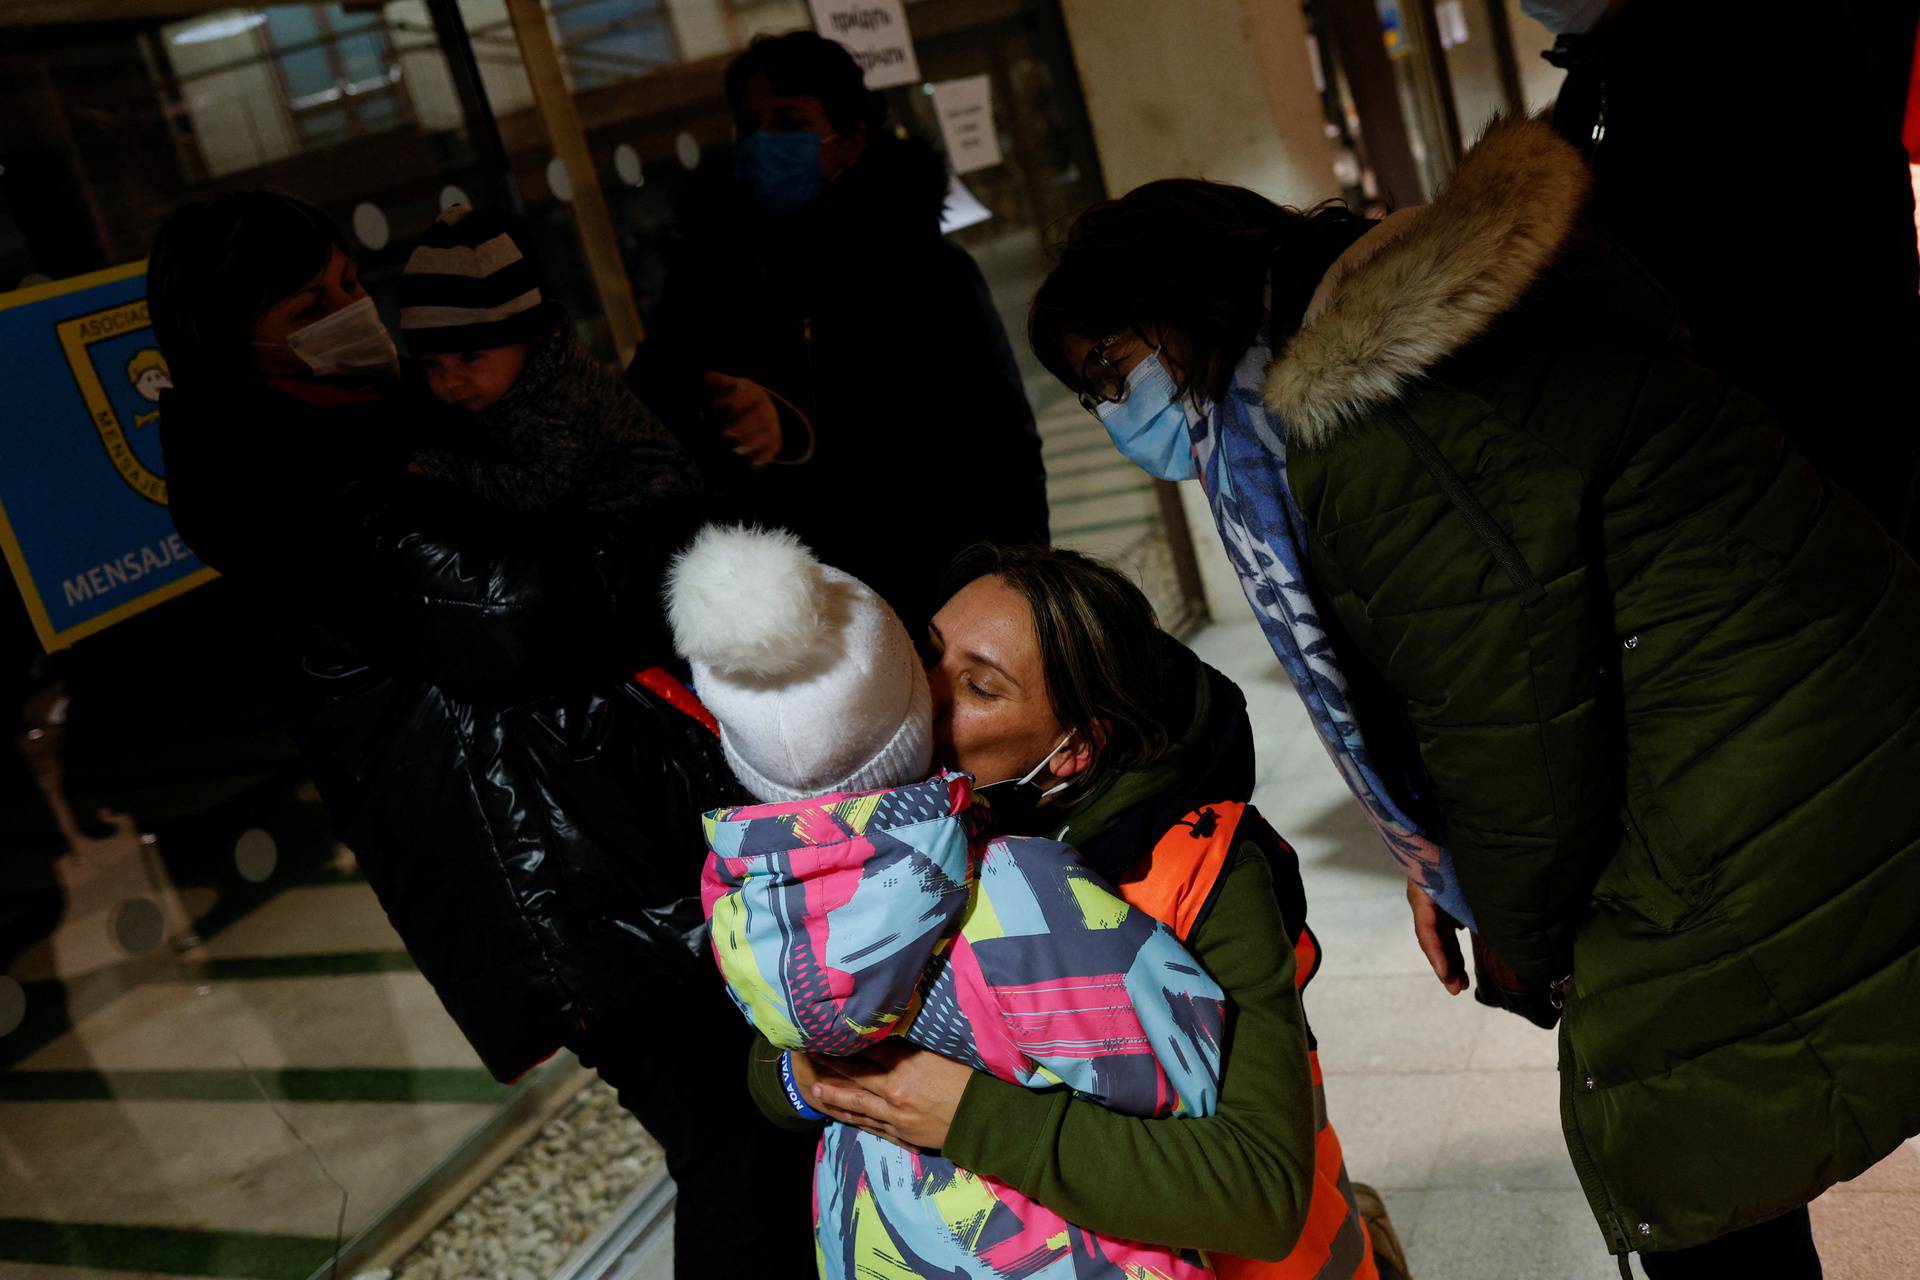 Marta Rodriguez, a taxi driver, bids farewell to Elina, 4, after finishing their trip from Poland to Madrid